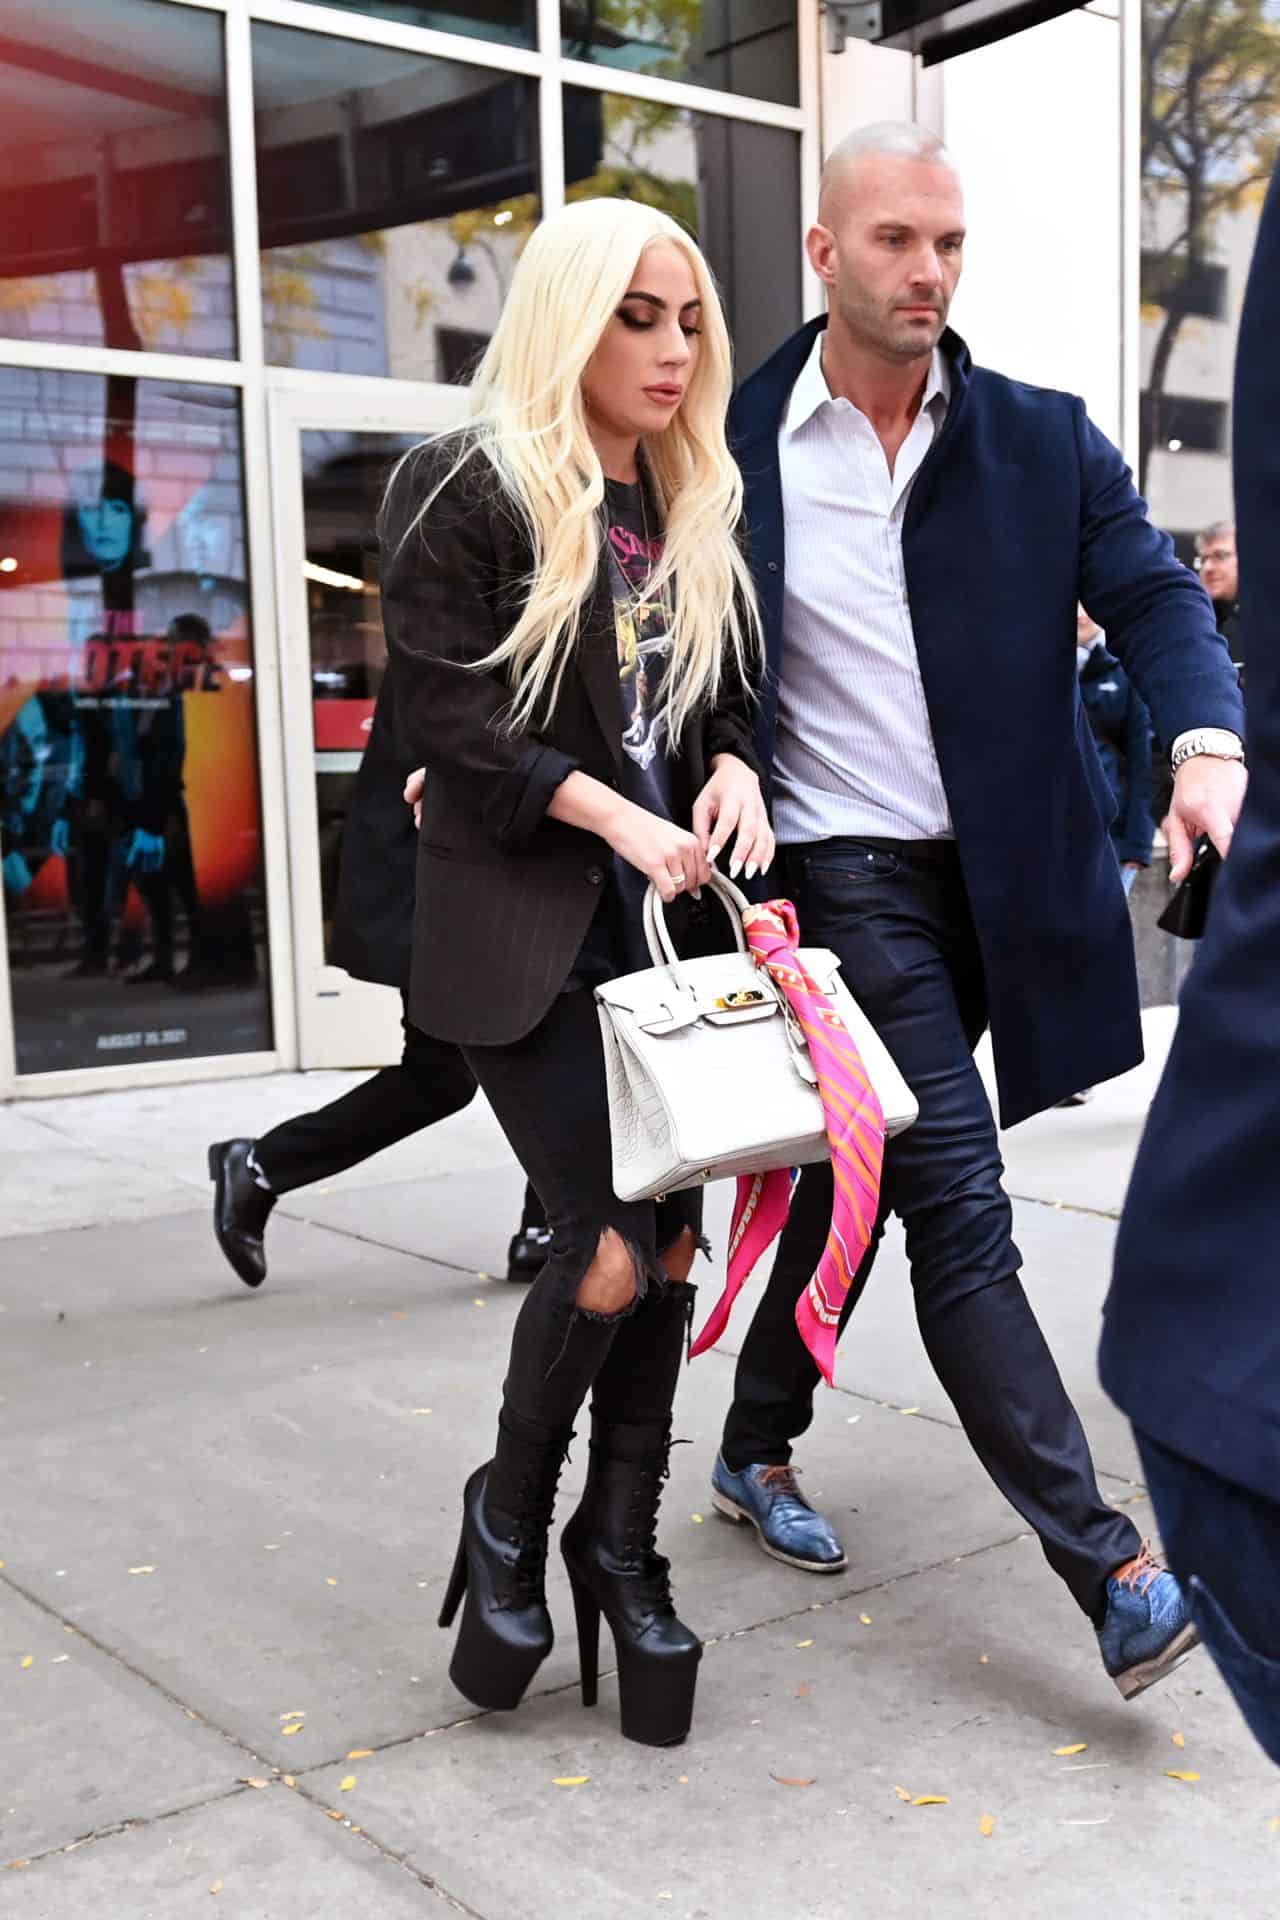 Lady Gaga Sports an Edgy Grunge Look Outside the AMC Theater in New York